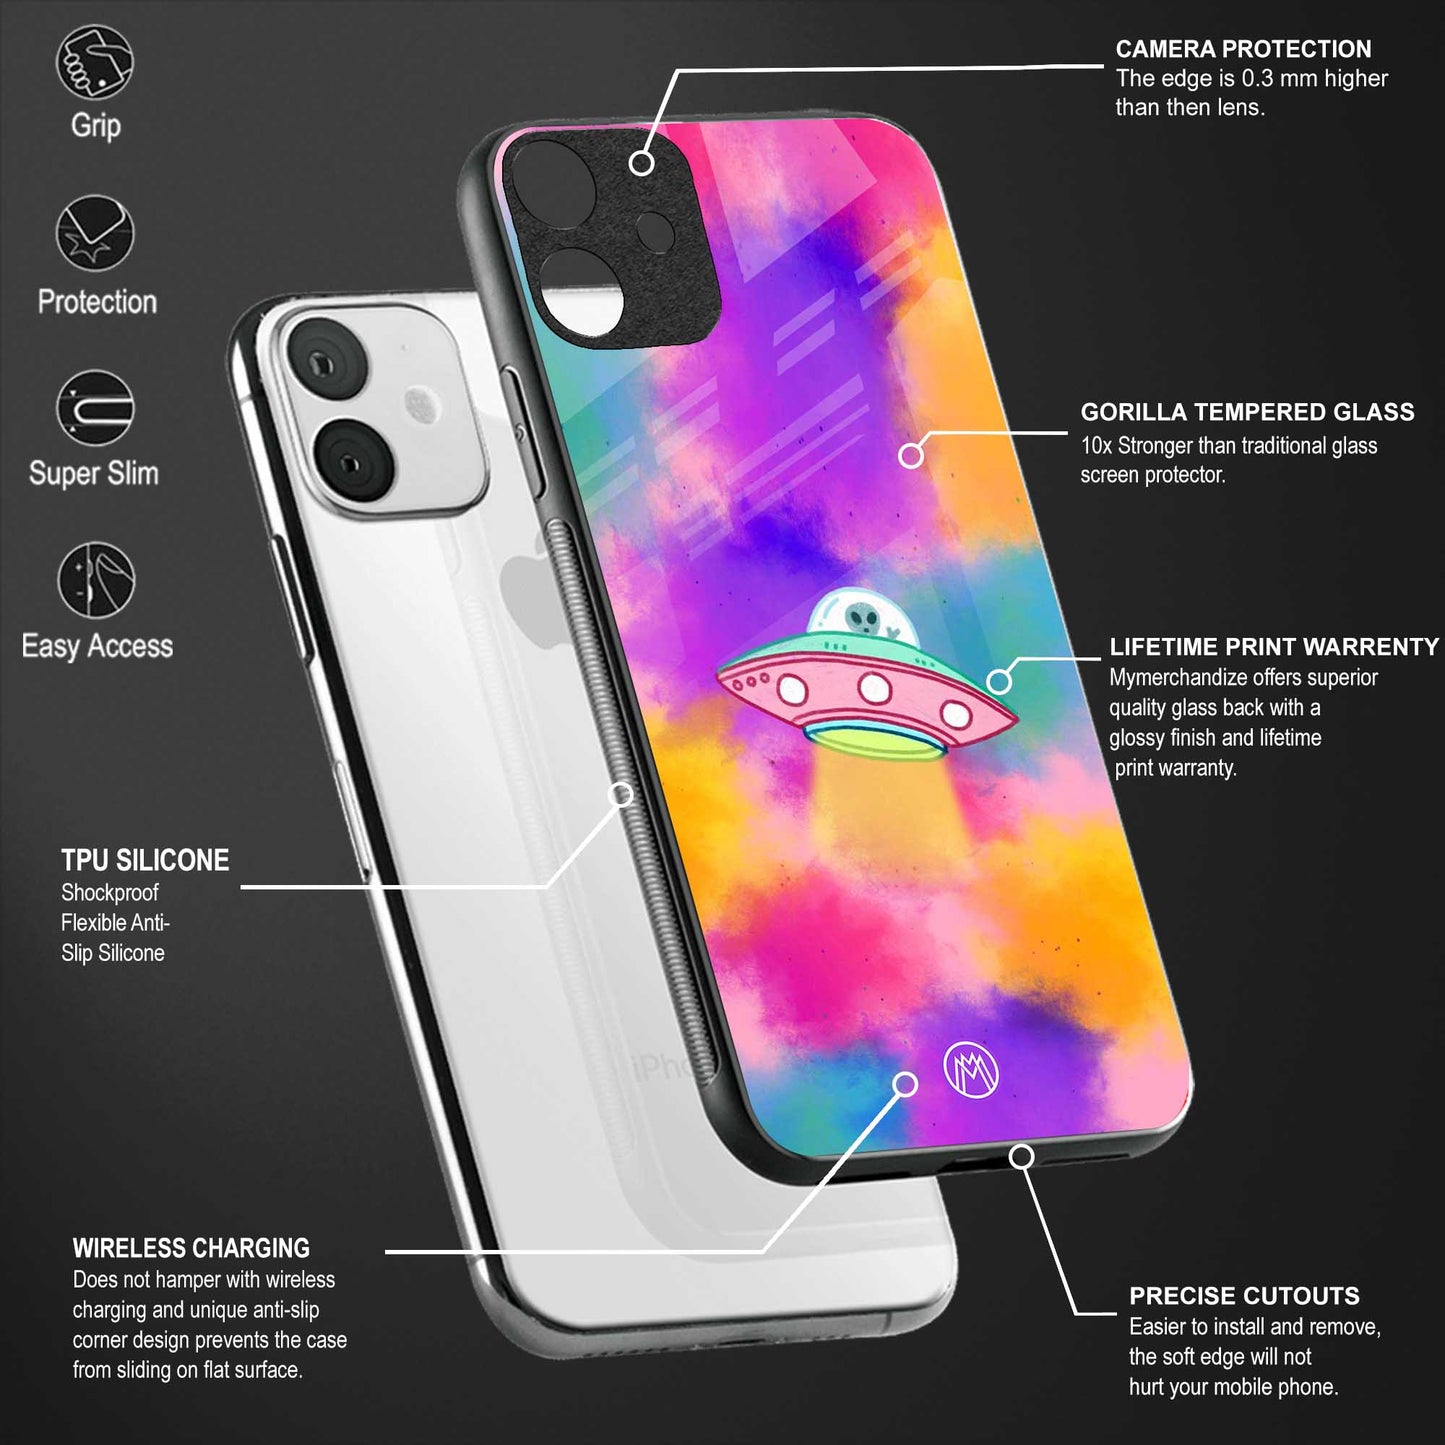 lil colourful alien back phone cover | glass case for oppo reno 5